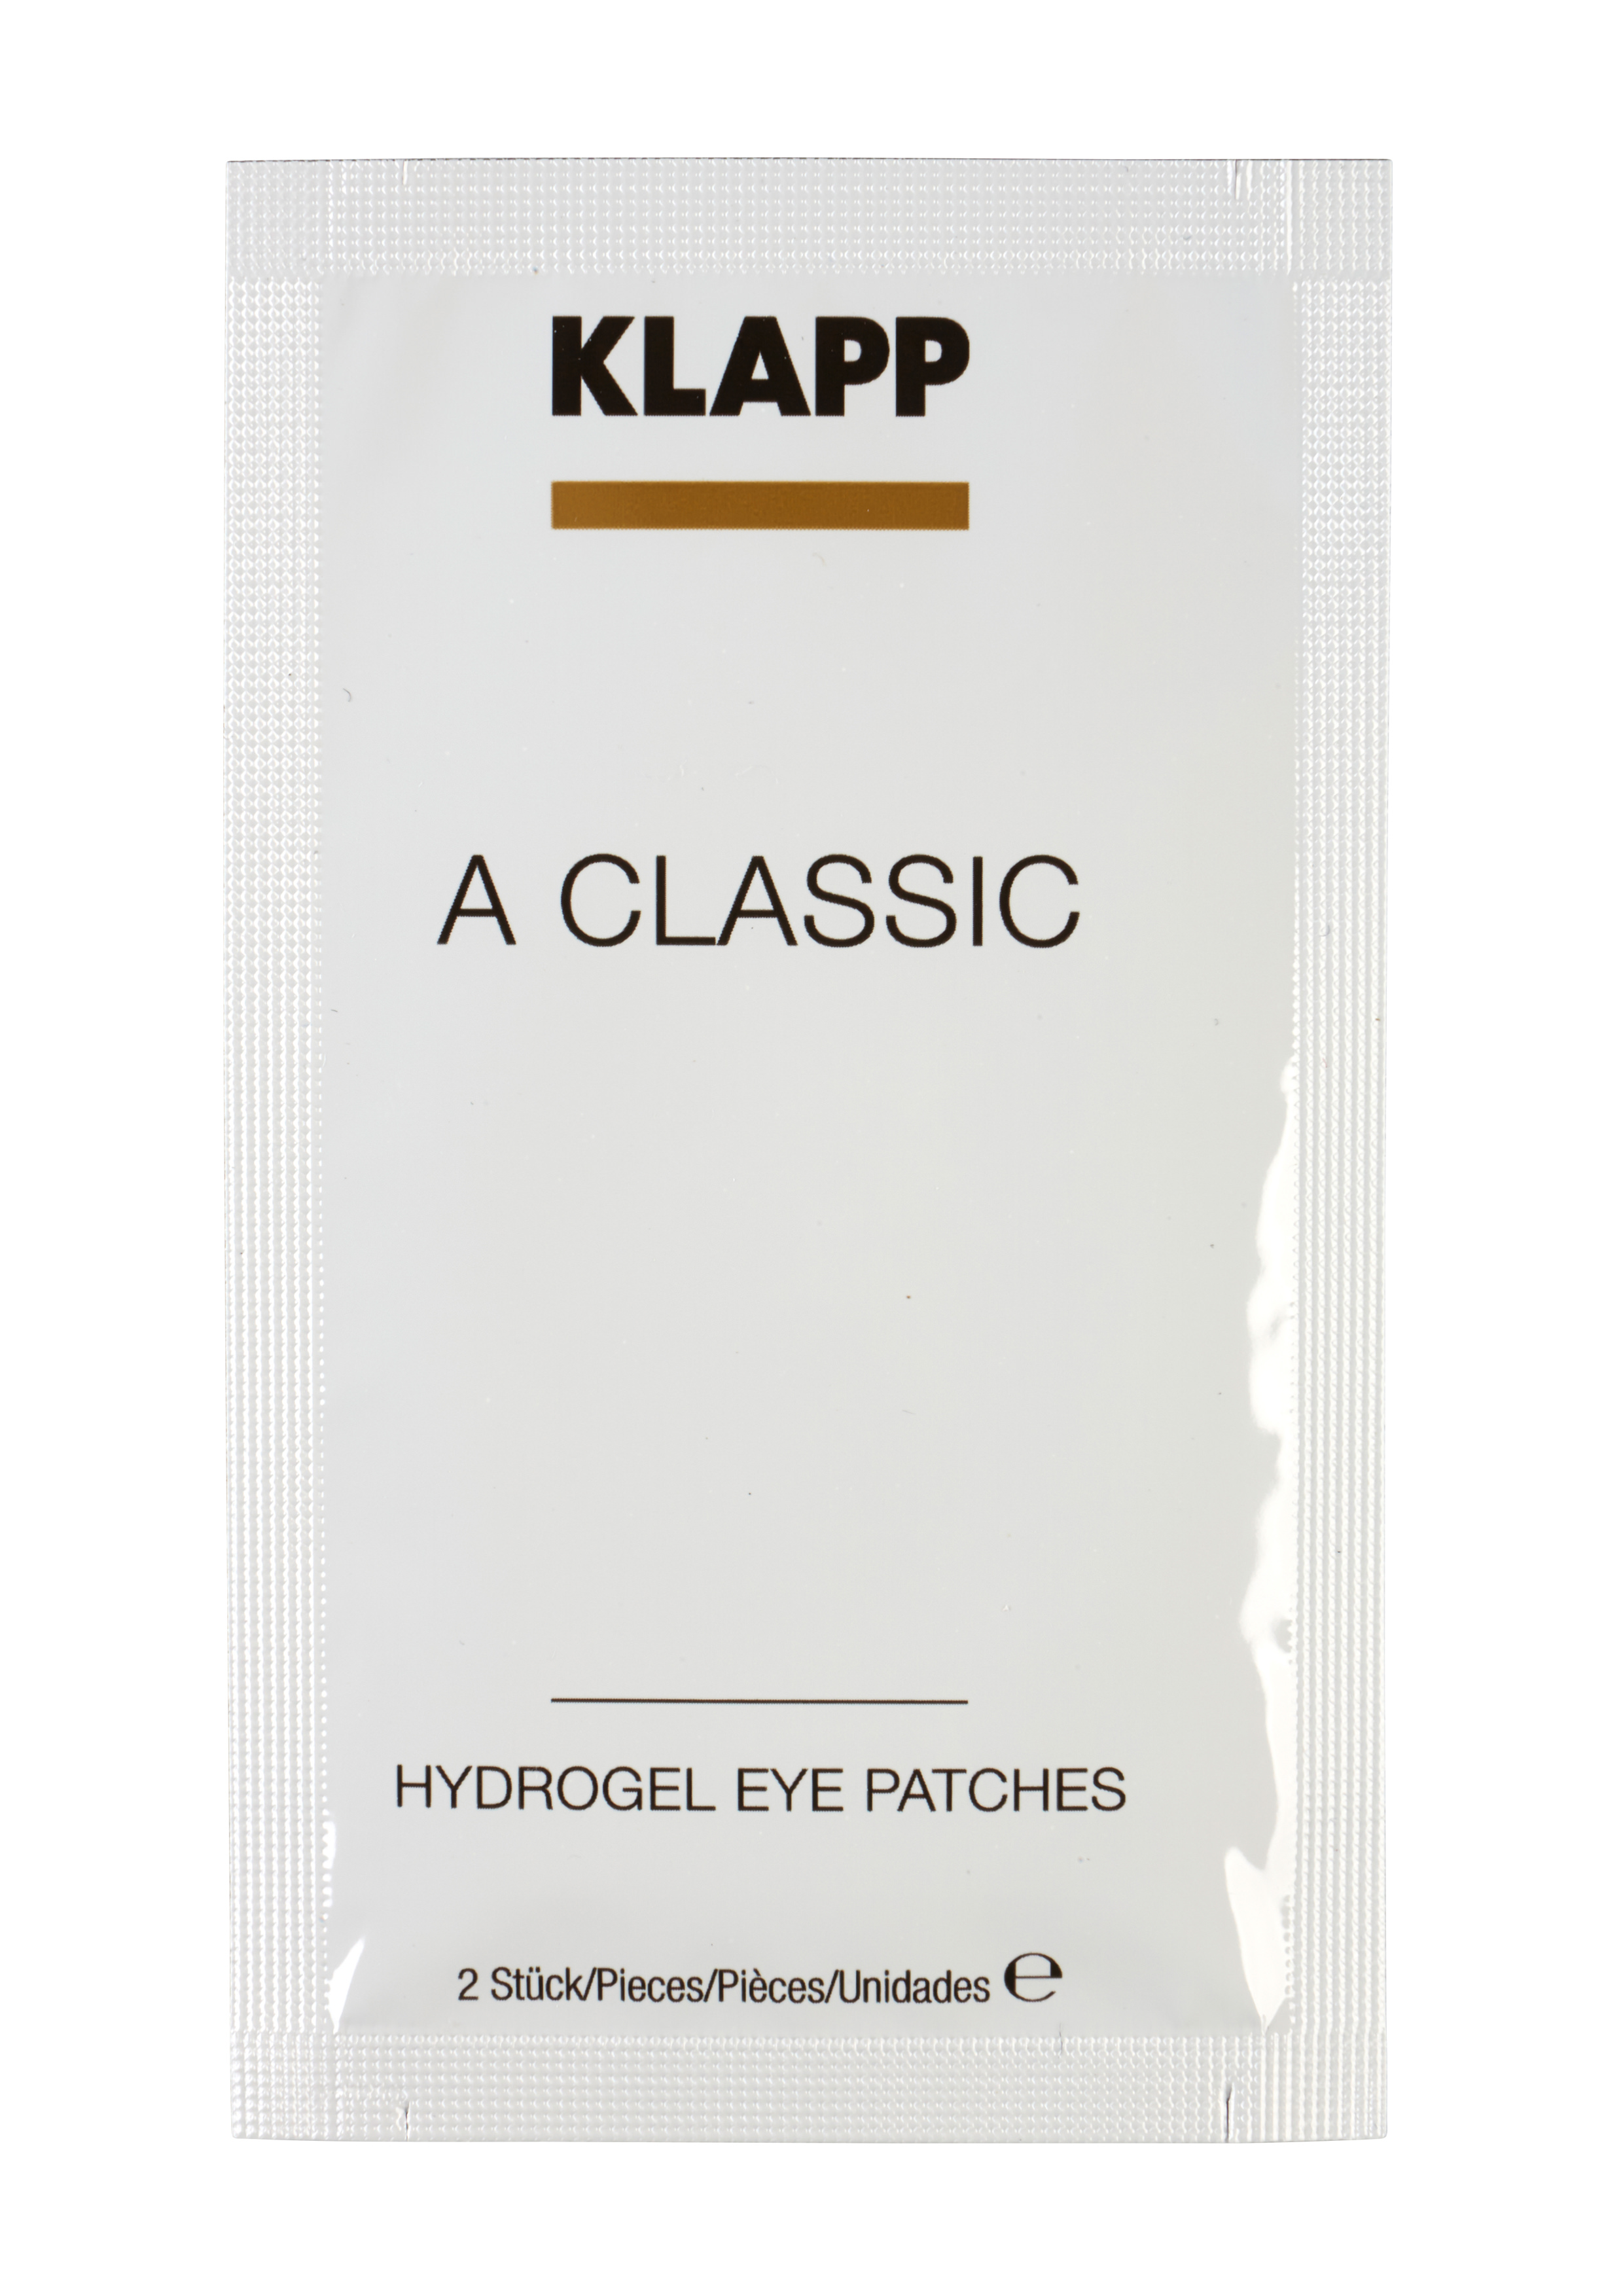 Klapp A Classic Hydrogel Eye Patches